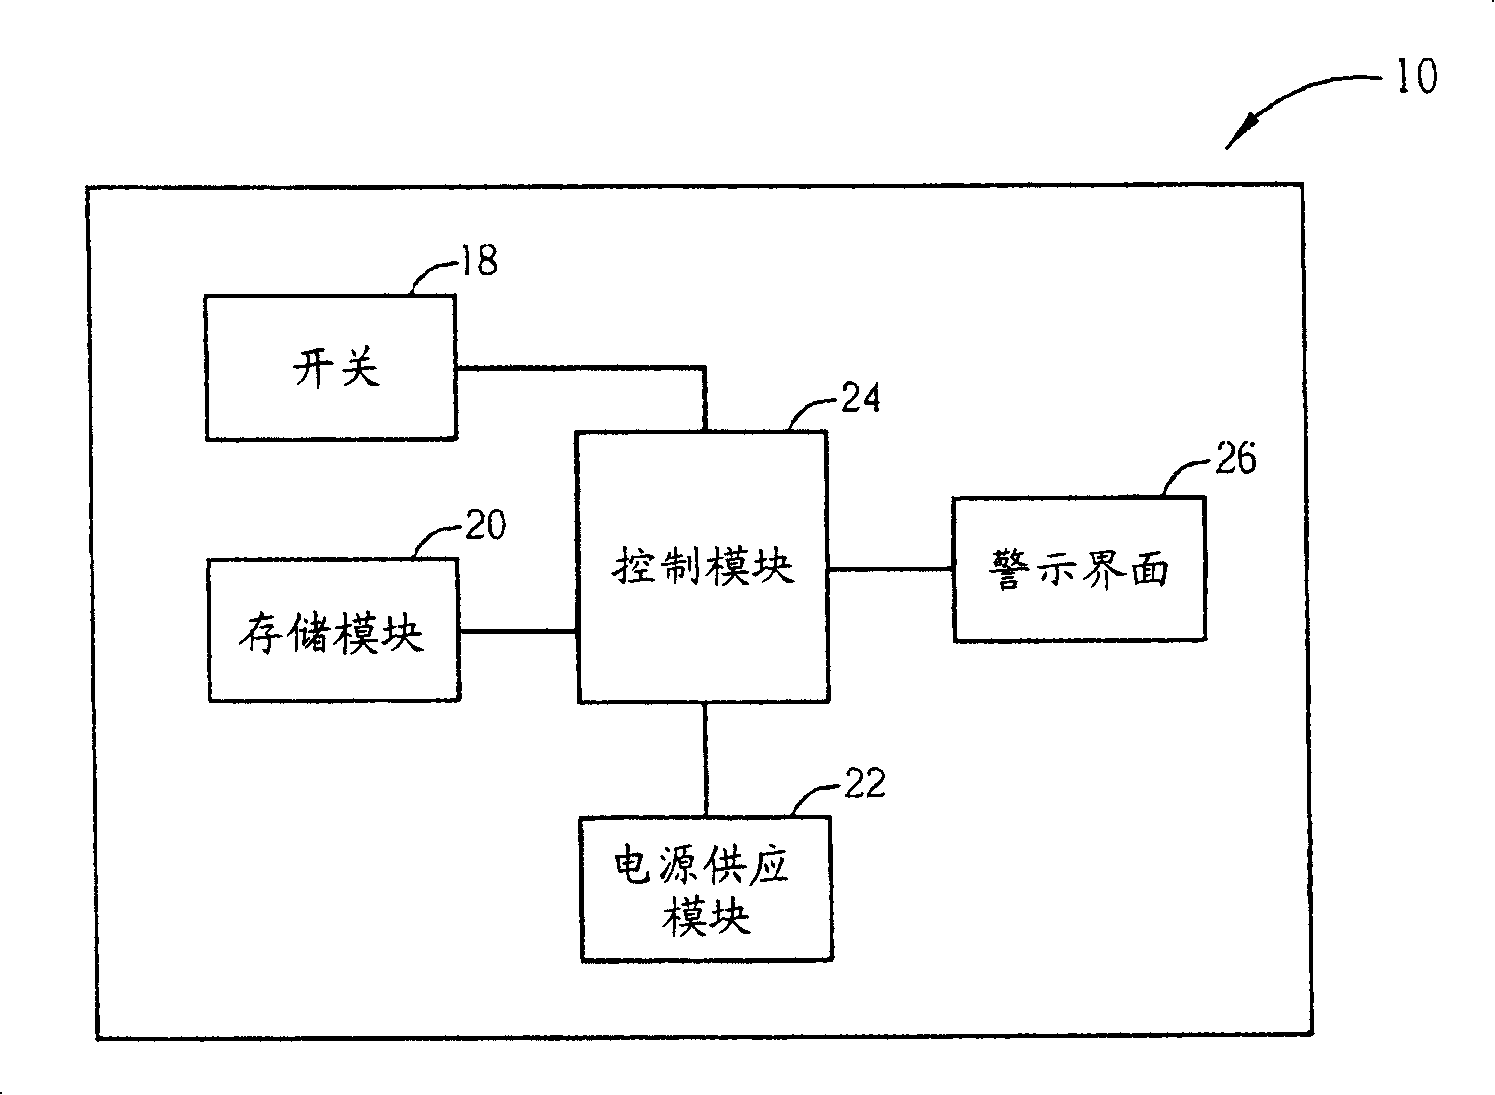 Portable electronic device with shell separation detection function